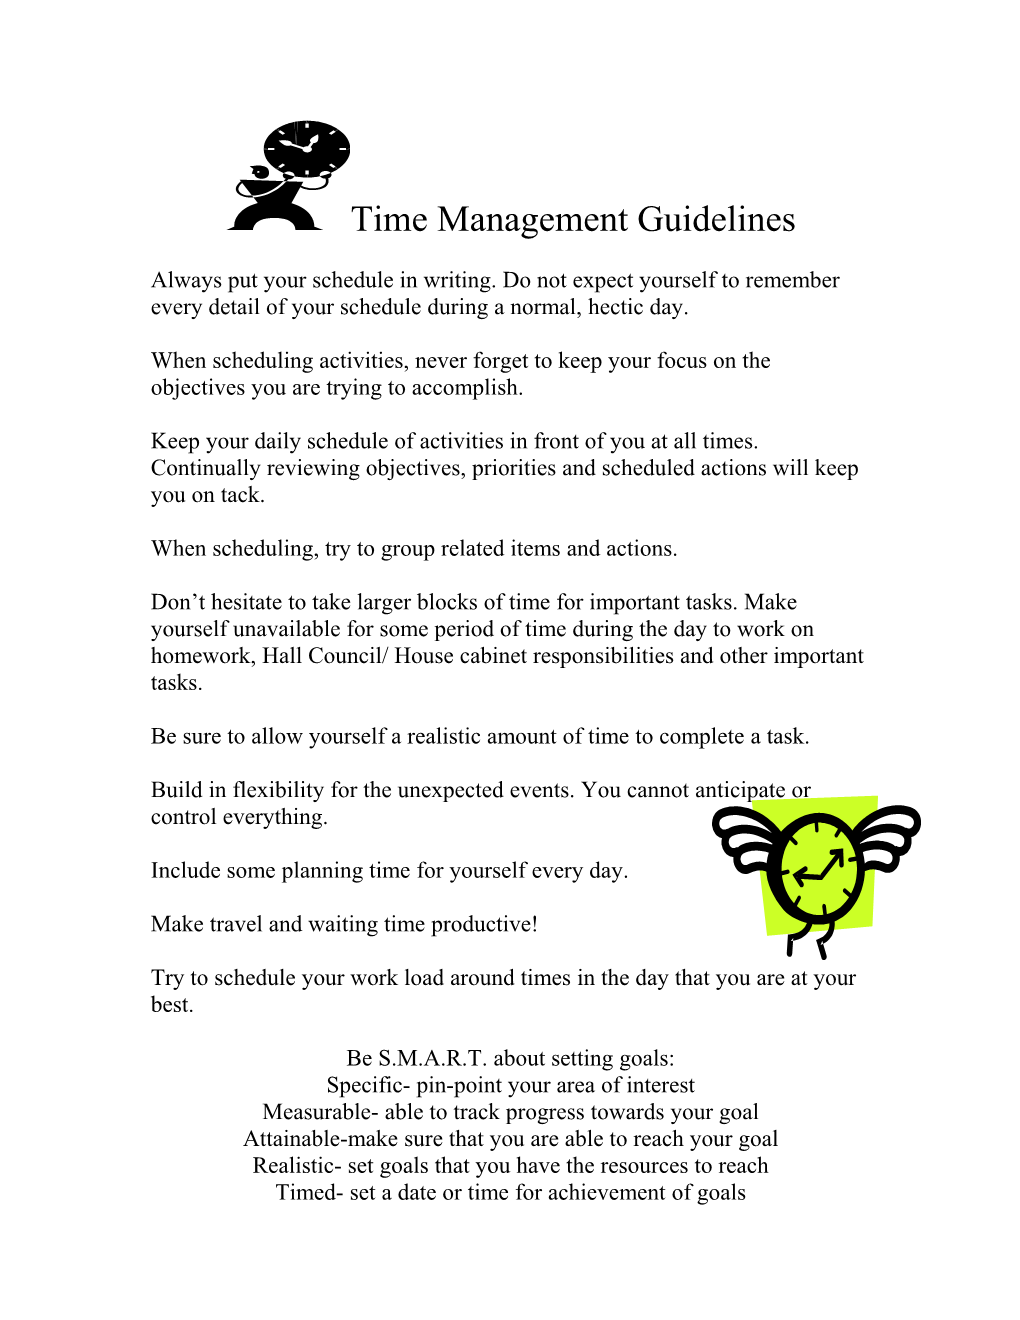 Time Management Guidelines